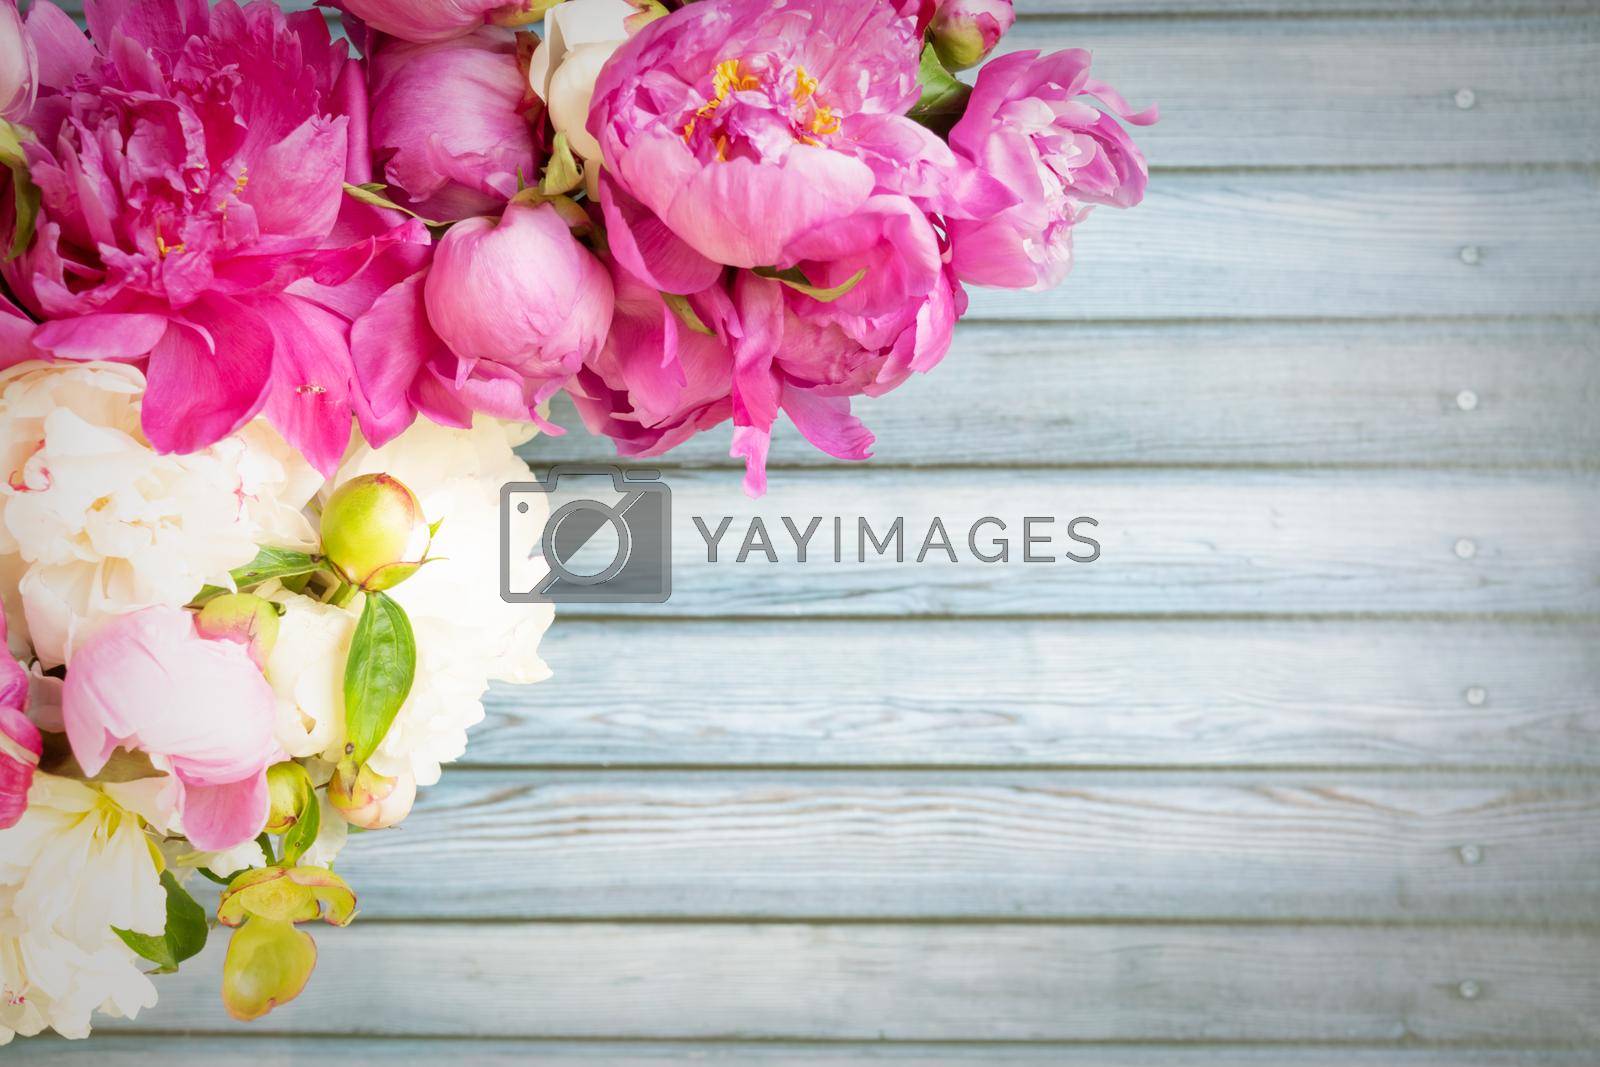 Border of Beautiful pink and white peony flowers on wooden table with copy space for your text top view and flat lay style.